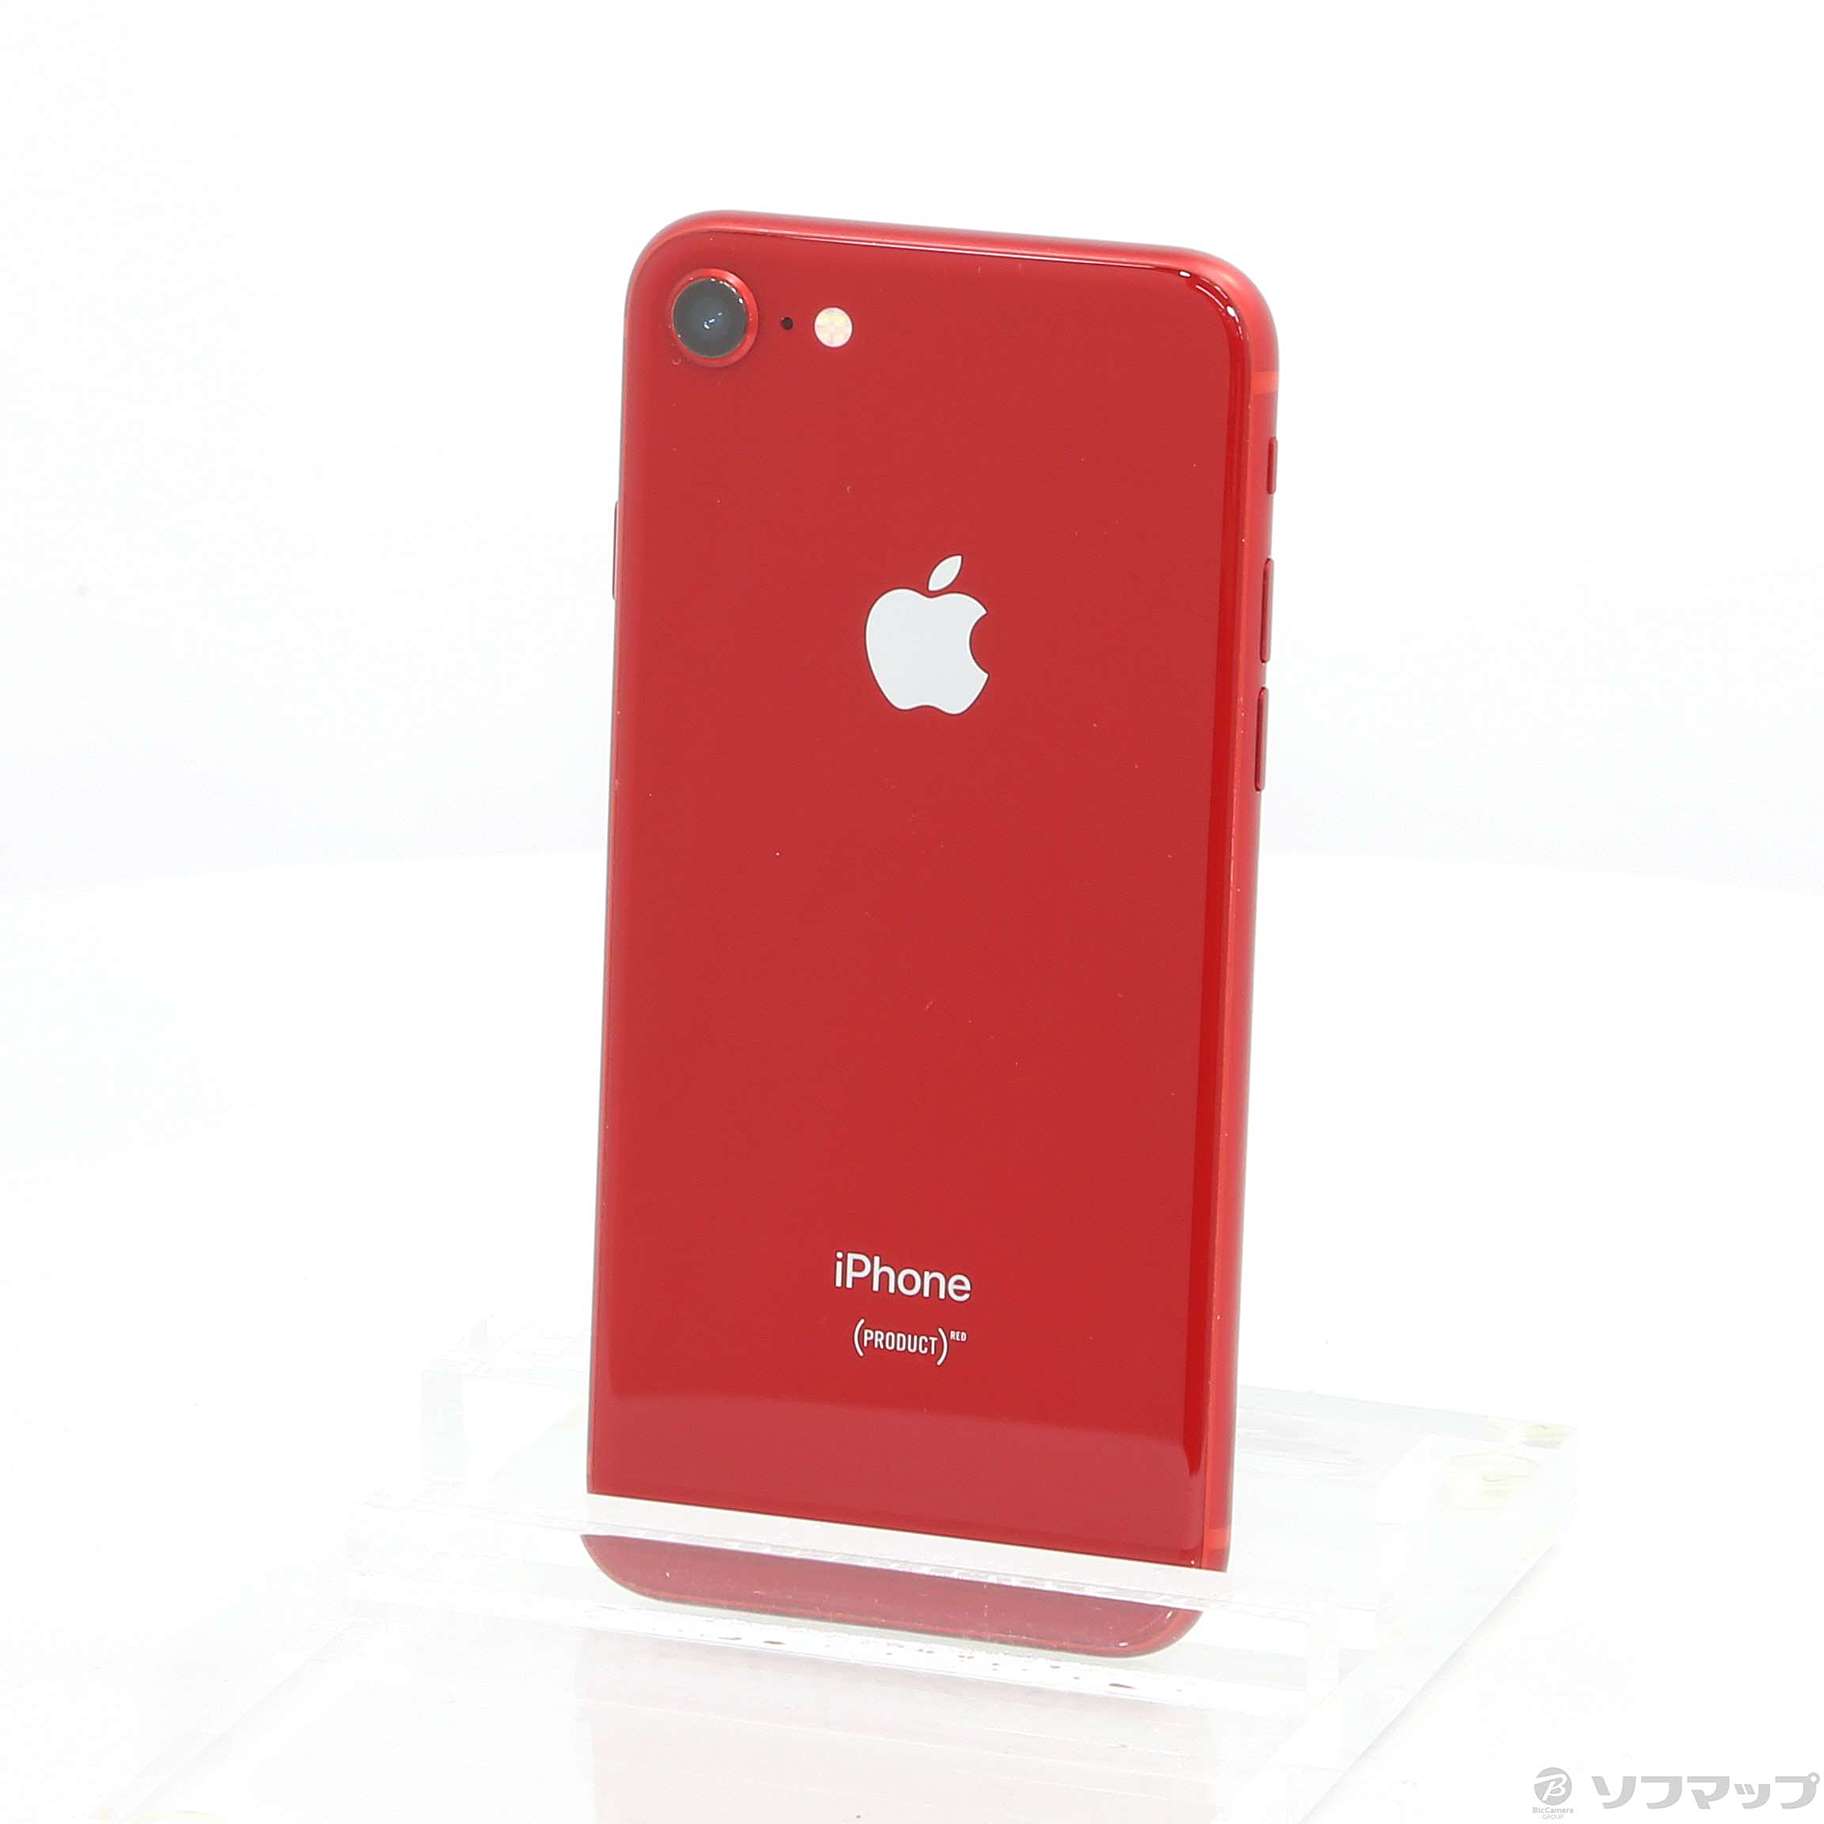 iPhone 8 256GB Red プロダクト レッド SIMフリー X62A - 7